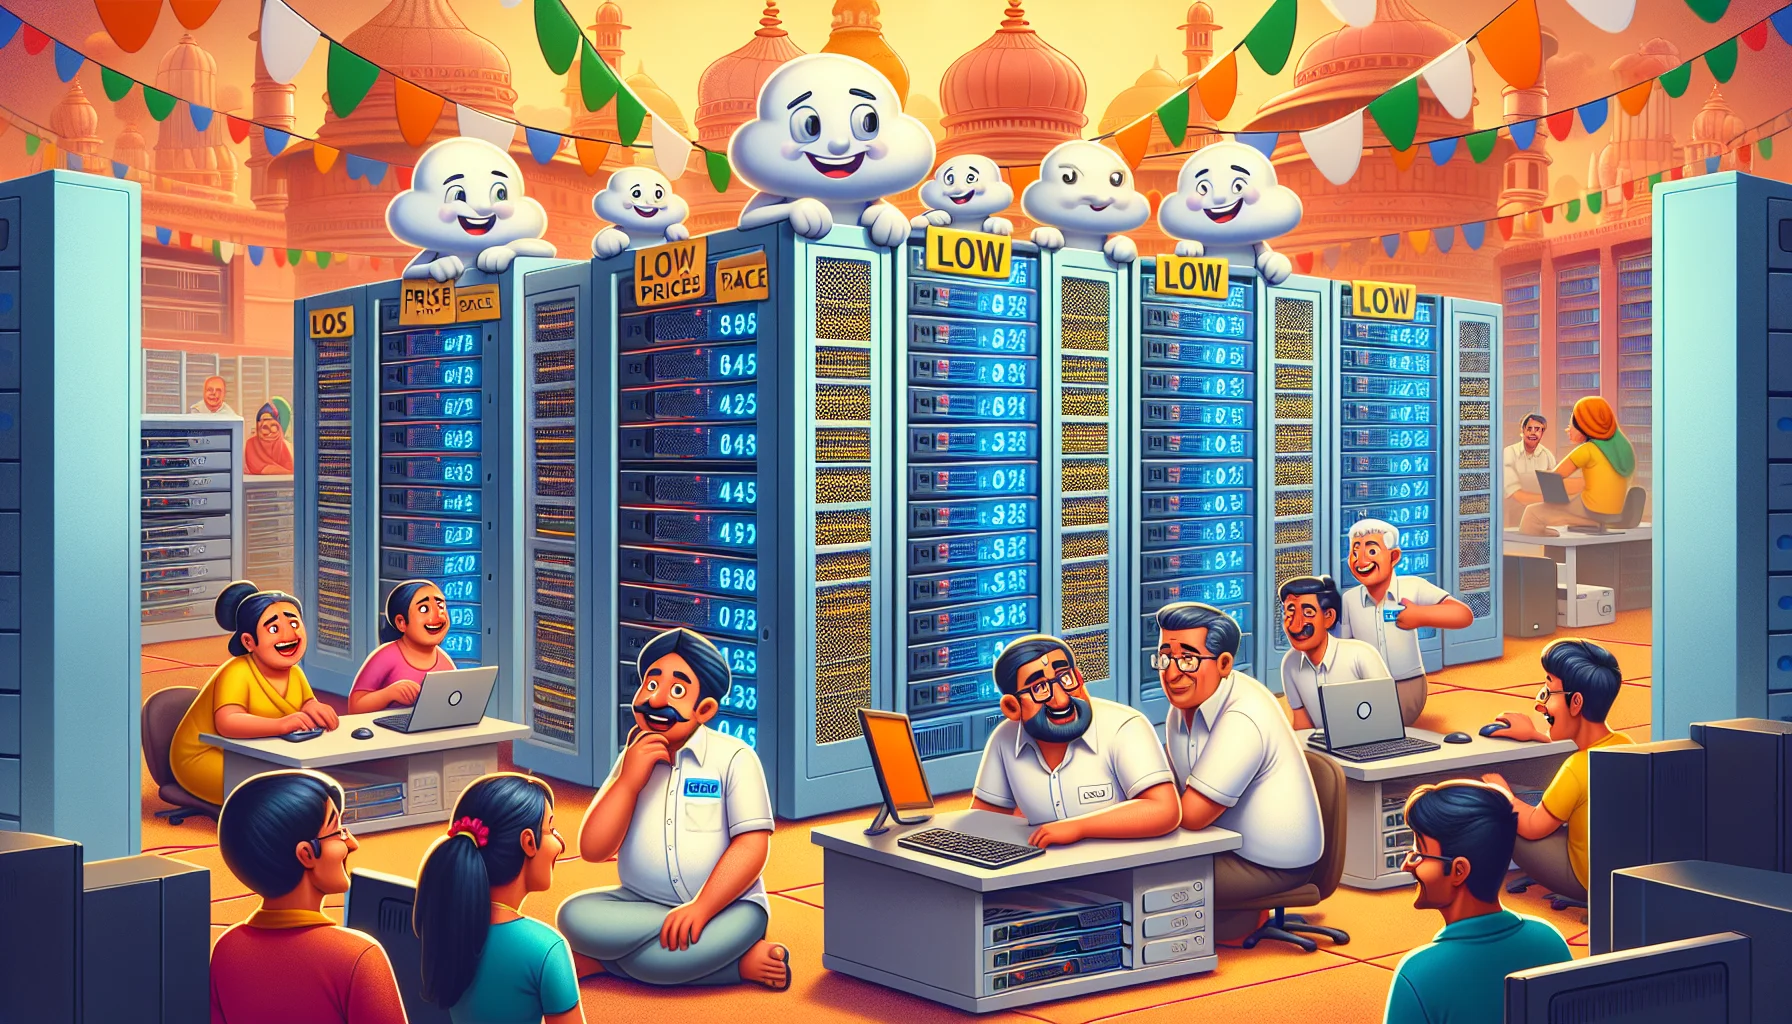 Depict a humorous scenario featuring web hosting in India. Display a number of whimsical, anthropomorphized servers in a bustling server farm that are creatively displaying low prices on their bodies. These servers are eagerly engaging in friendly chatter, symbolizing the ease of communication between servers in a VPS hosting environment. Around them, busy tech workers, an Asian woman and a Caucasian man, are working hard, but also sharing a laugh, reinforcing the light-hearted mood. The backdrop should be filled with vibrant colors and Indian architecture, representing the location of the hosting.